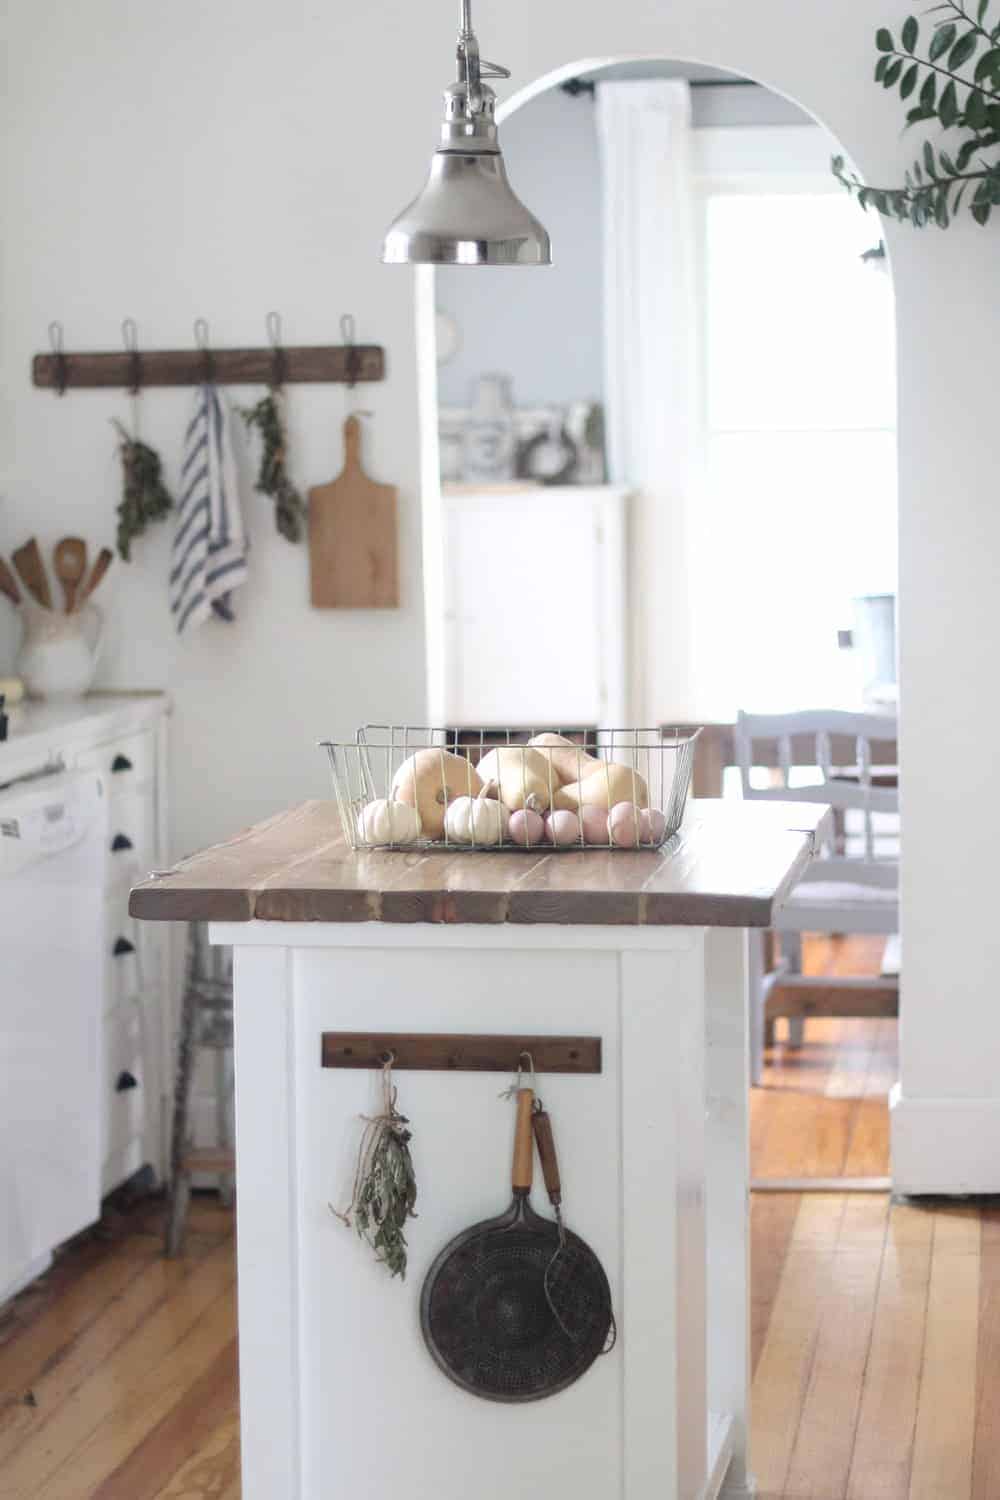 Simple Ways to Add Farmhouse Style to Any Kitchen ...